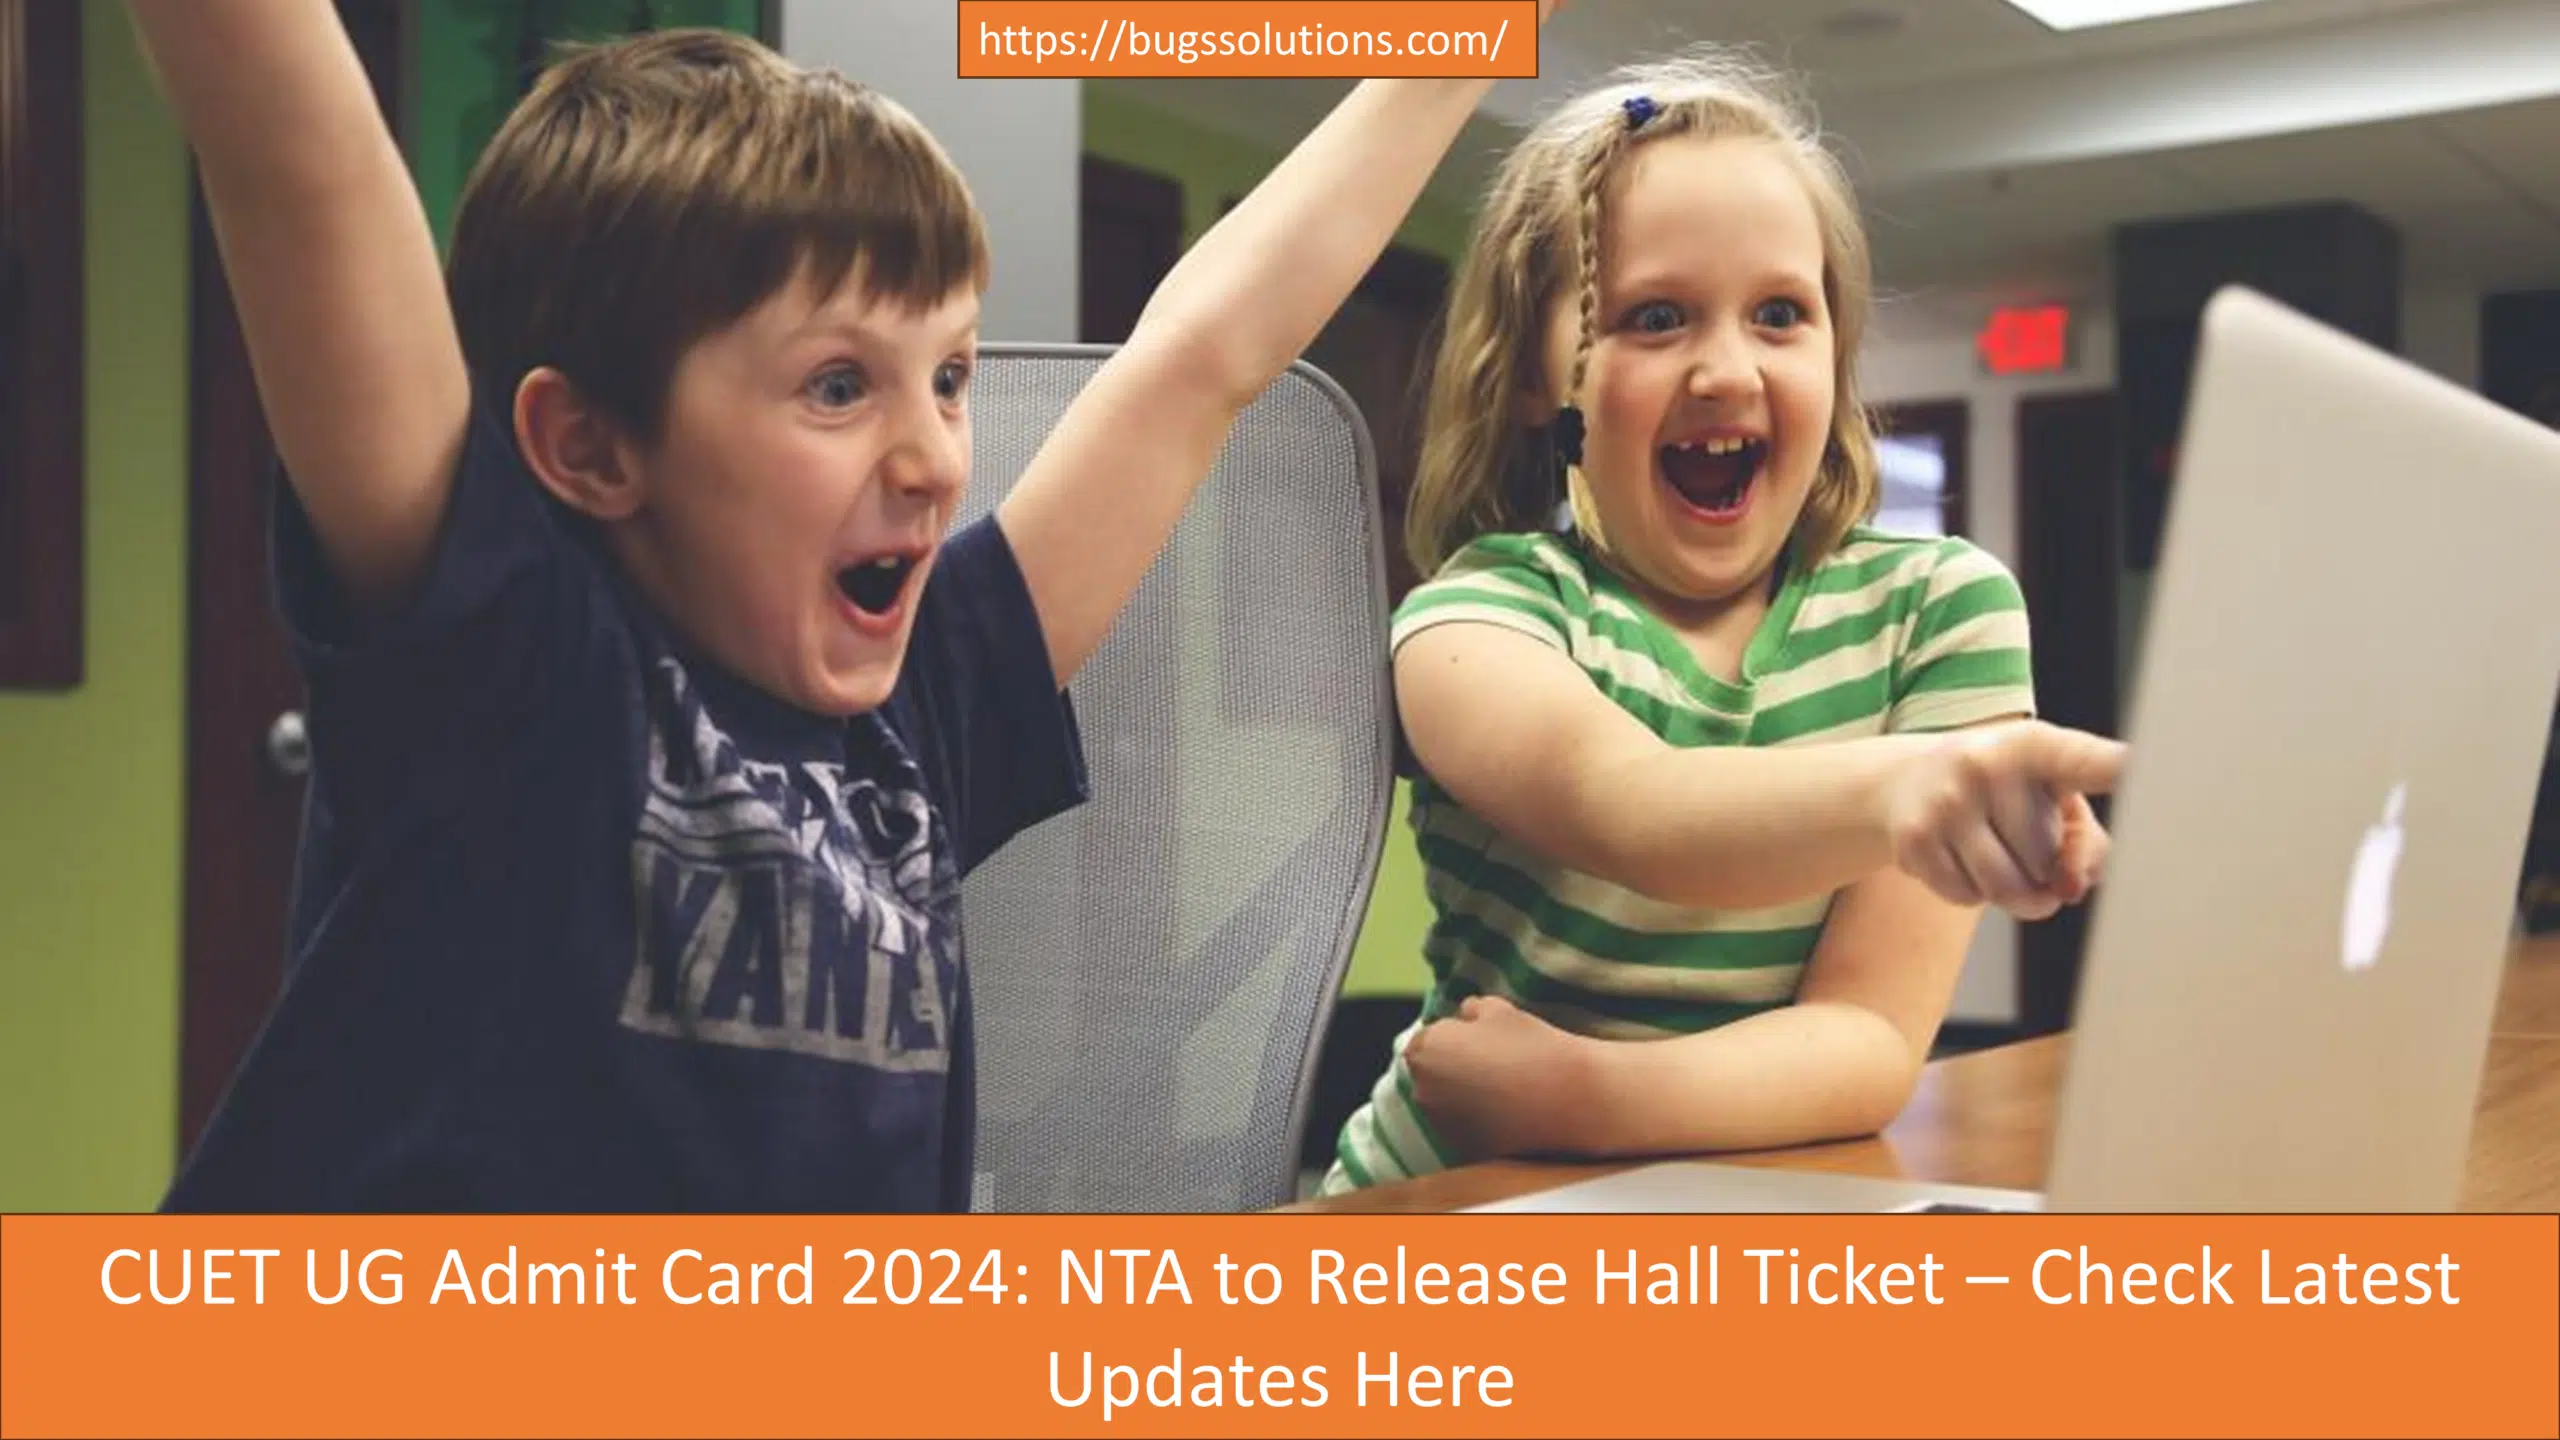 CUET UG Admit Card 2024: NTA to Release Hall Ticket – Check Latest Updates Here